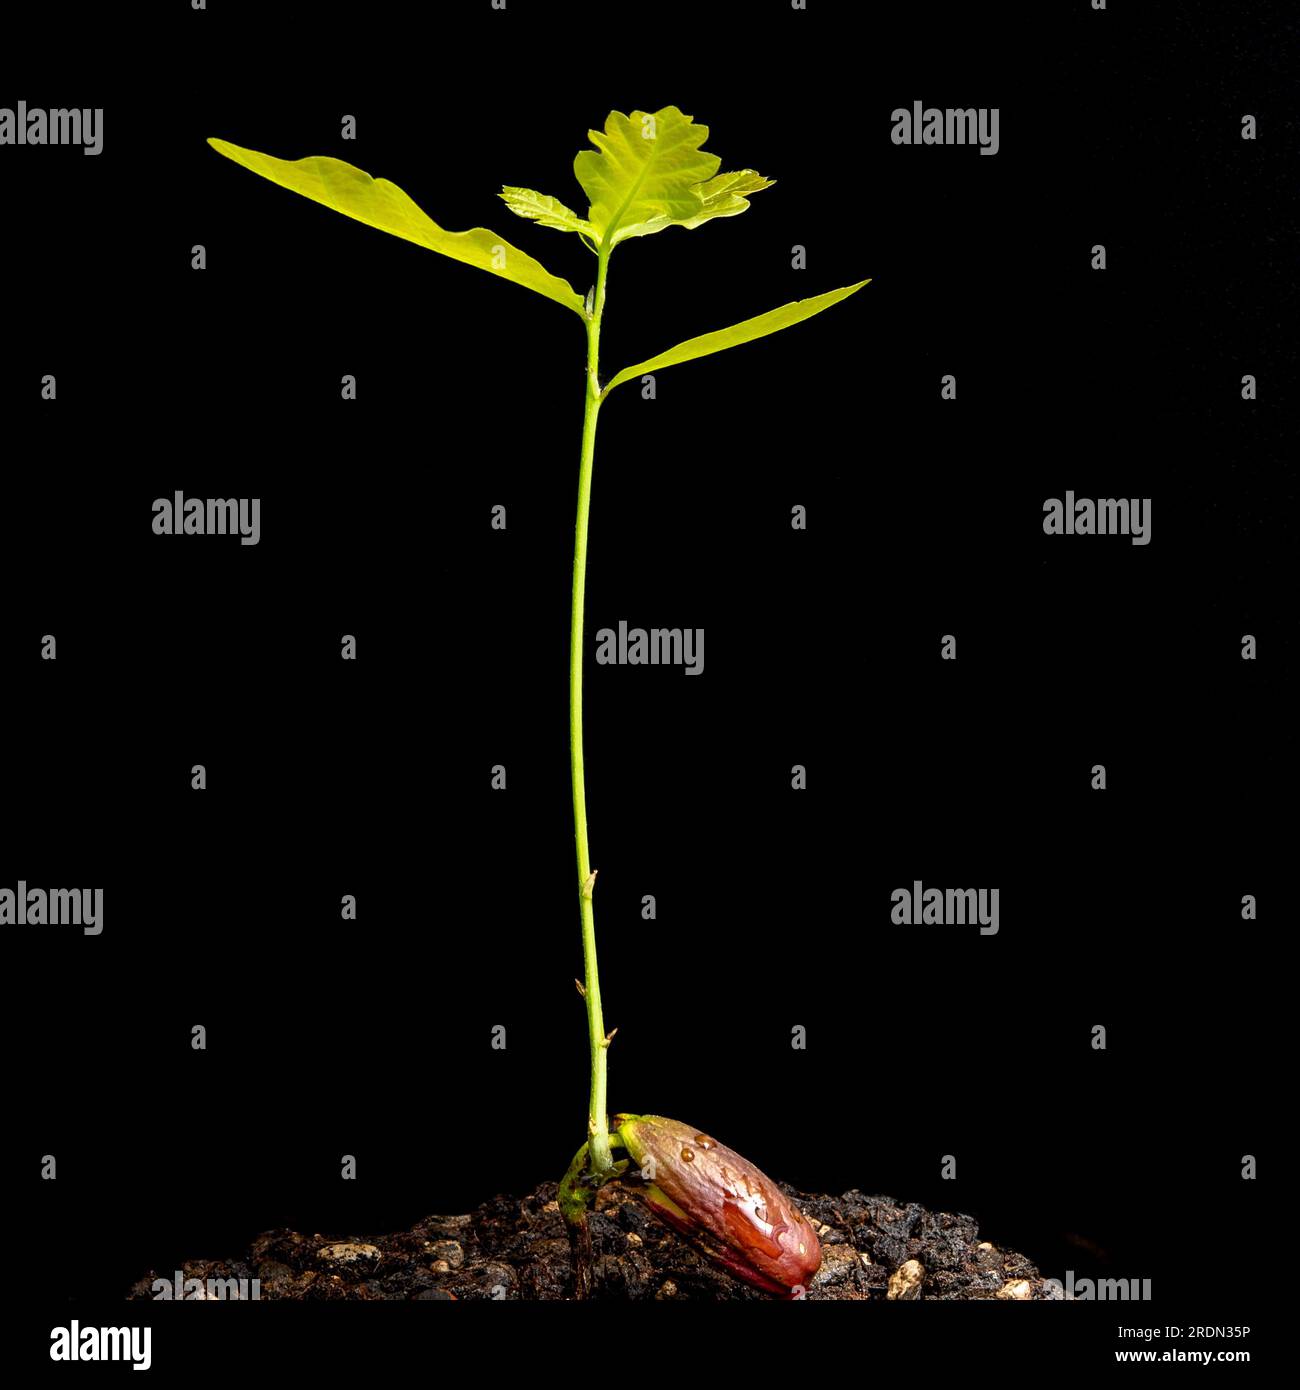 oak germling with growing leaves and root on black background Stock Photo